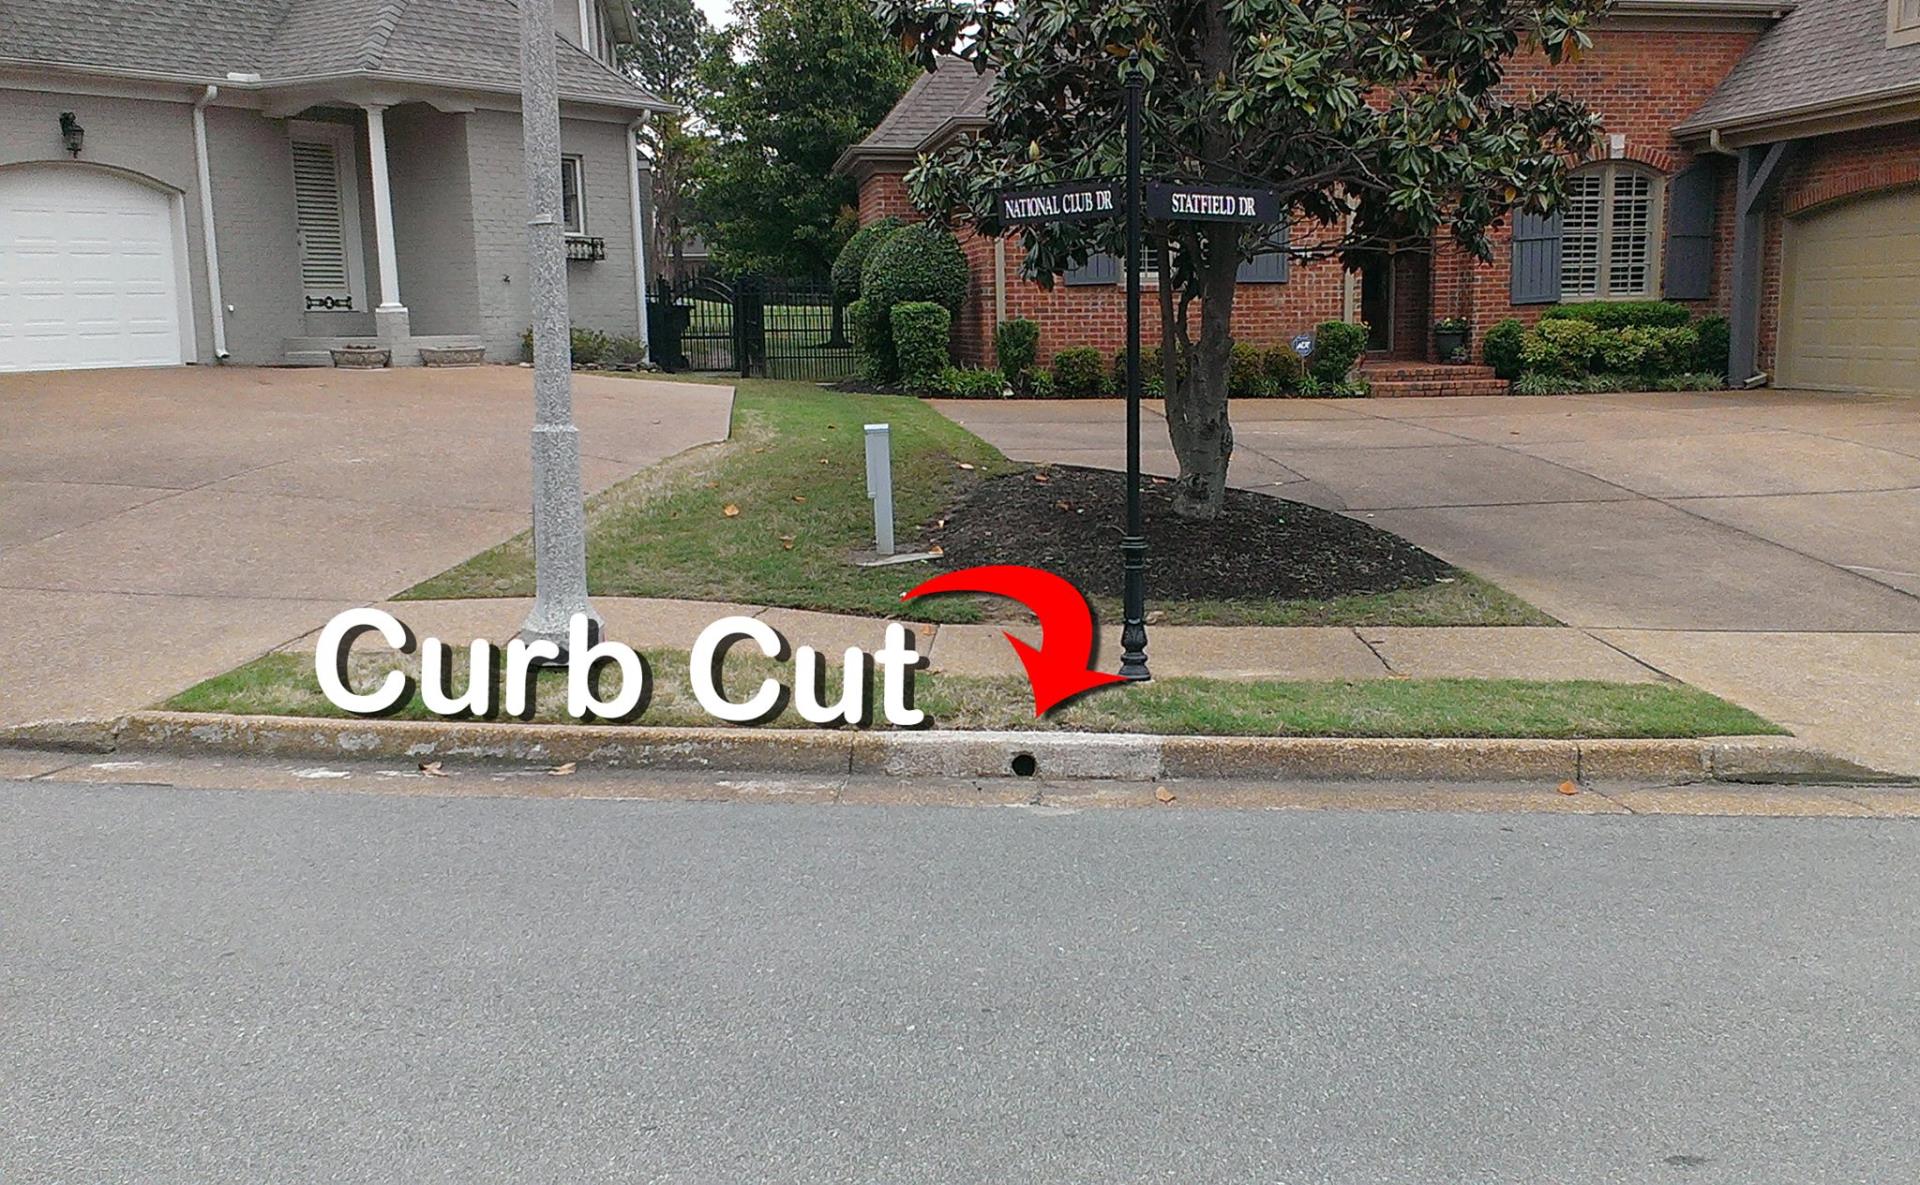 Spring projects - curb cuts do require a permit